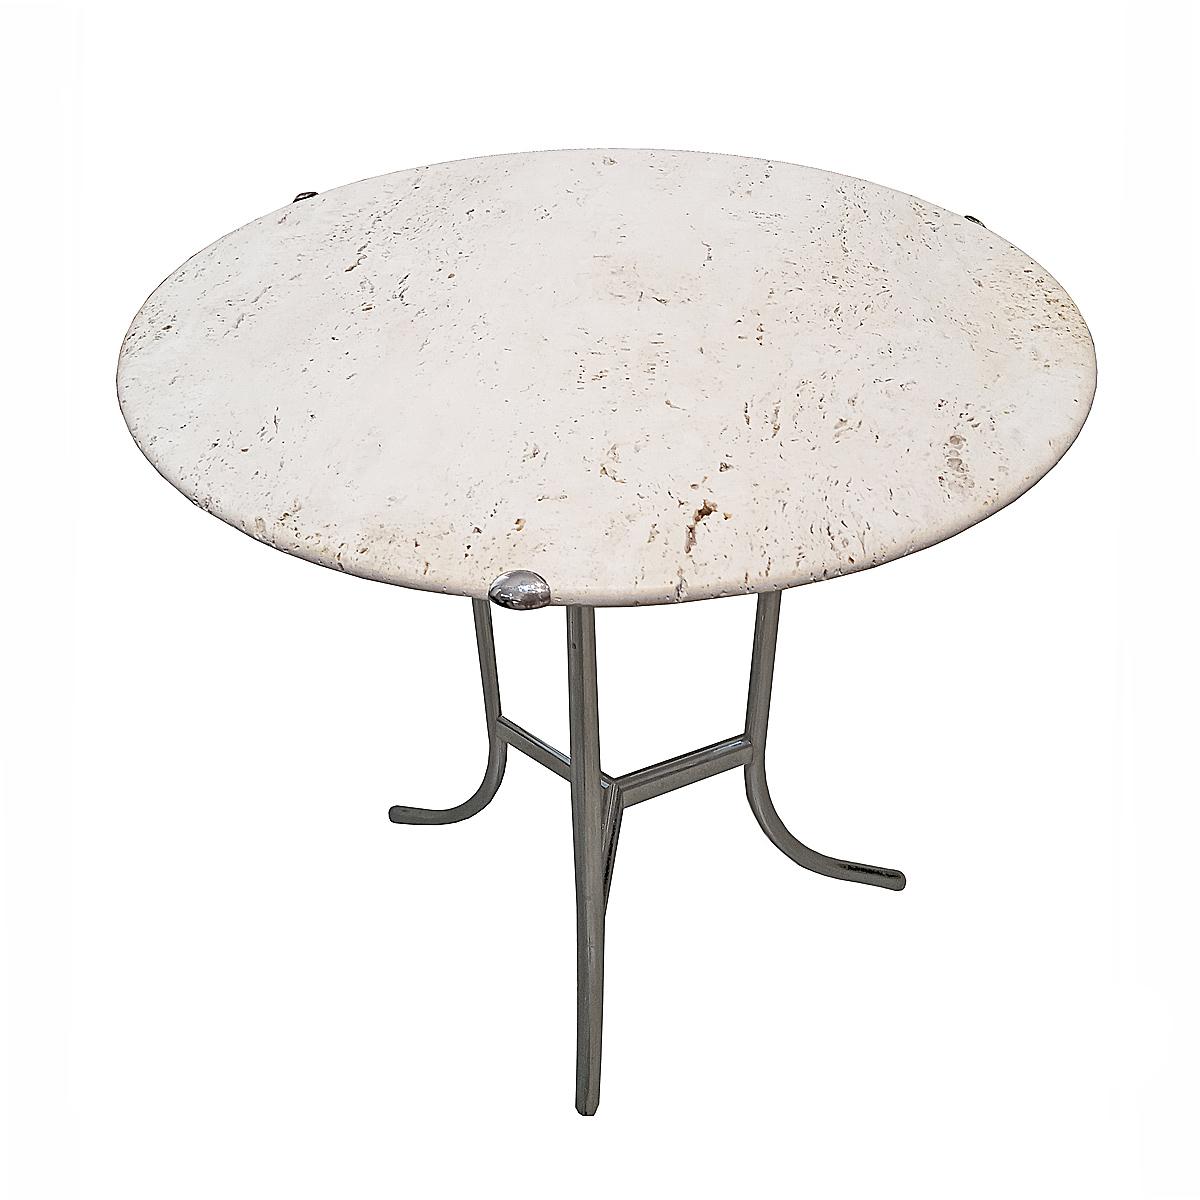 Mid-Century Modern Side Table by Cedric Hartman, in Travertine Marble and Nickel-Plated Brass